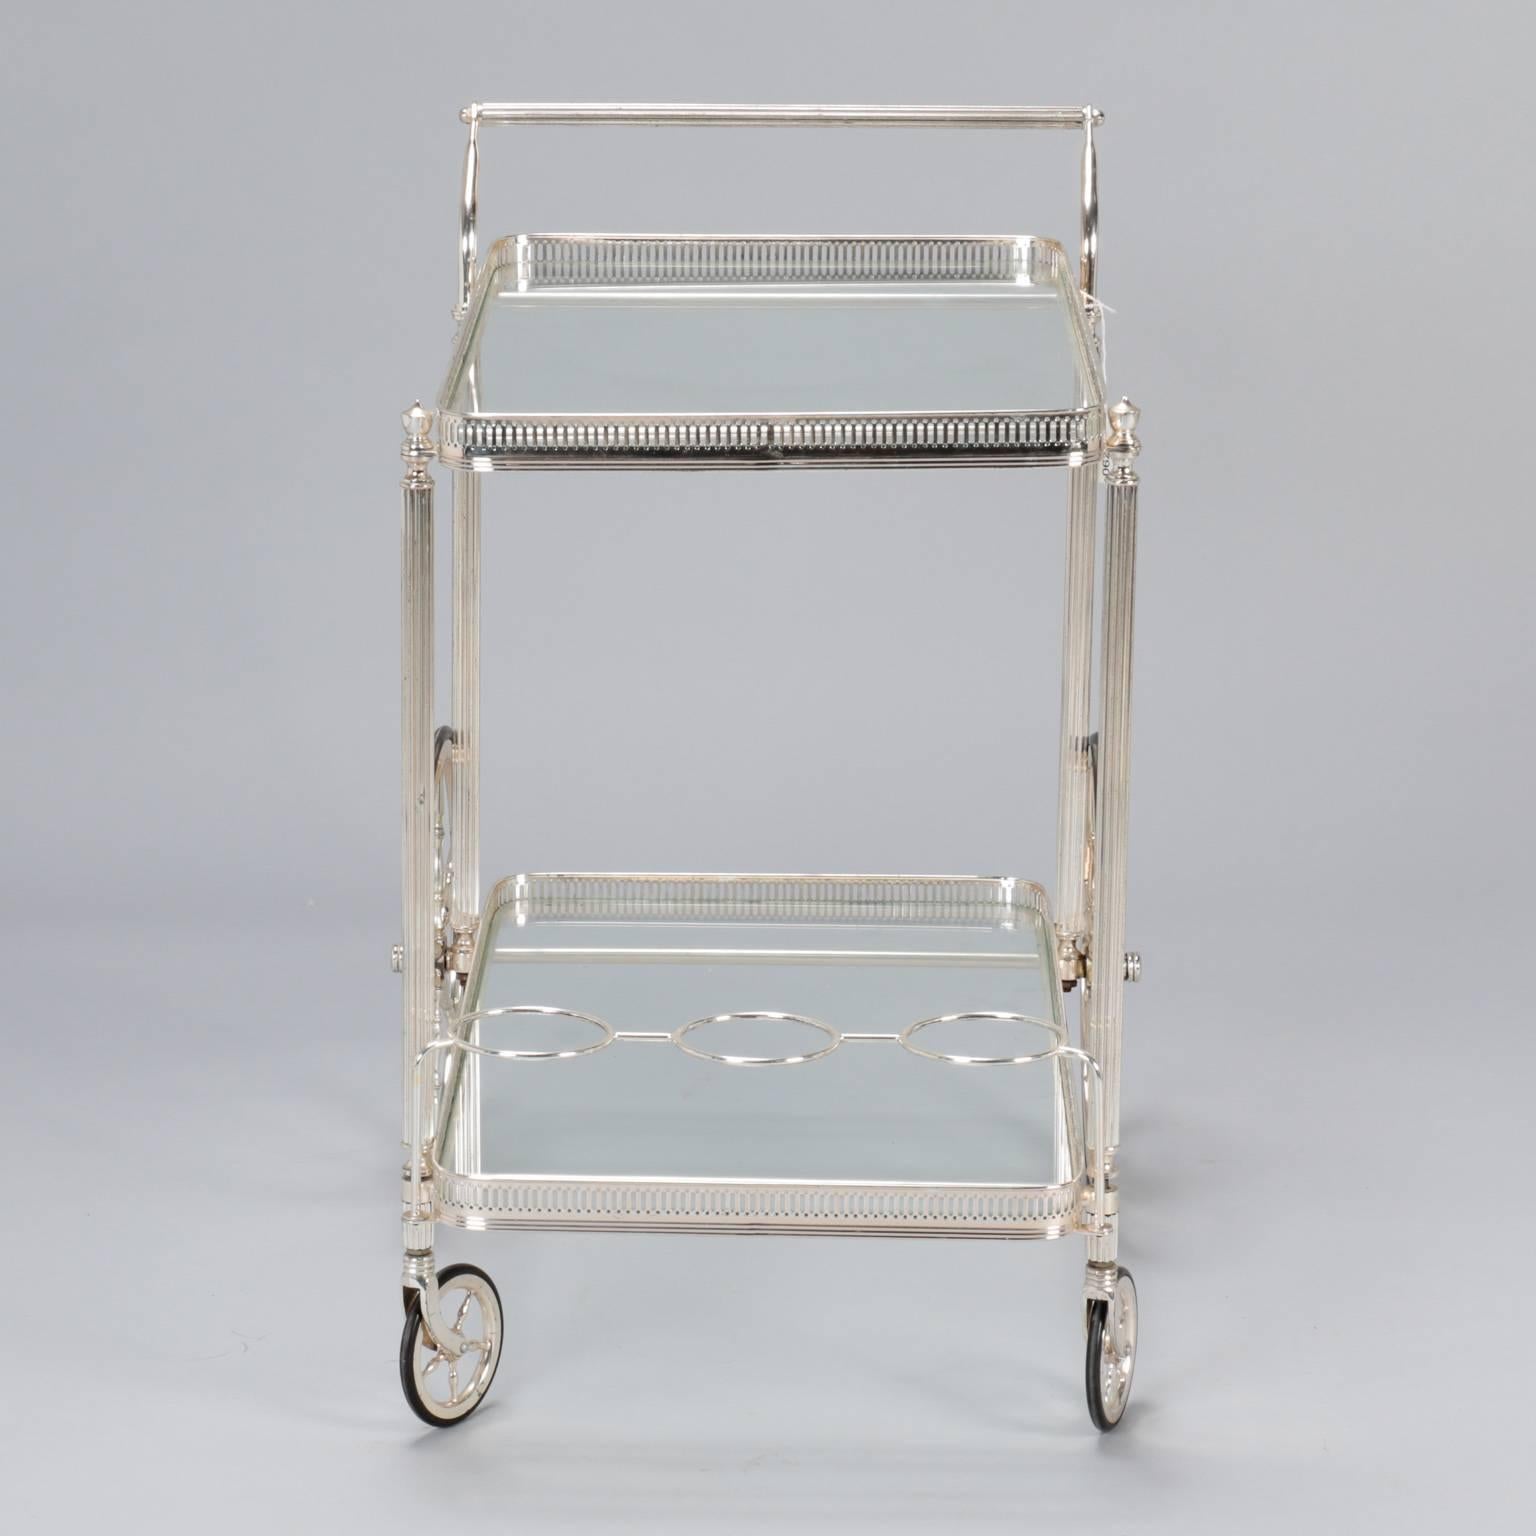 French Midcentury Nickel Plated Trolley or Bar Cart